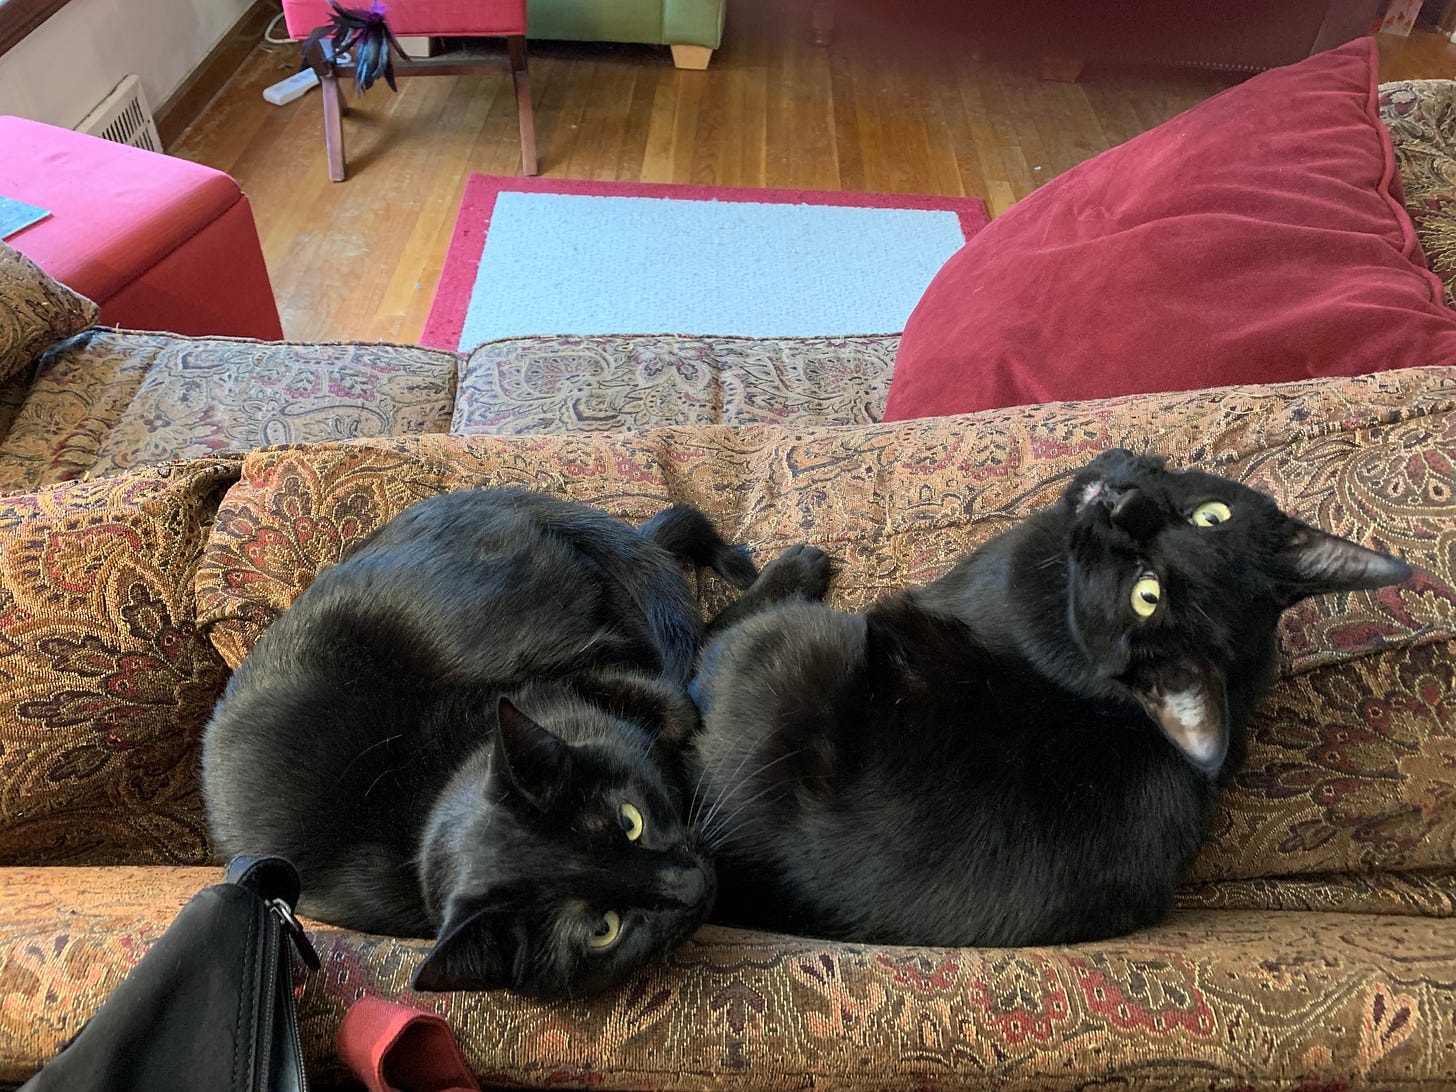 Two black cats on top of a brown couch. They are looking up at the camera.